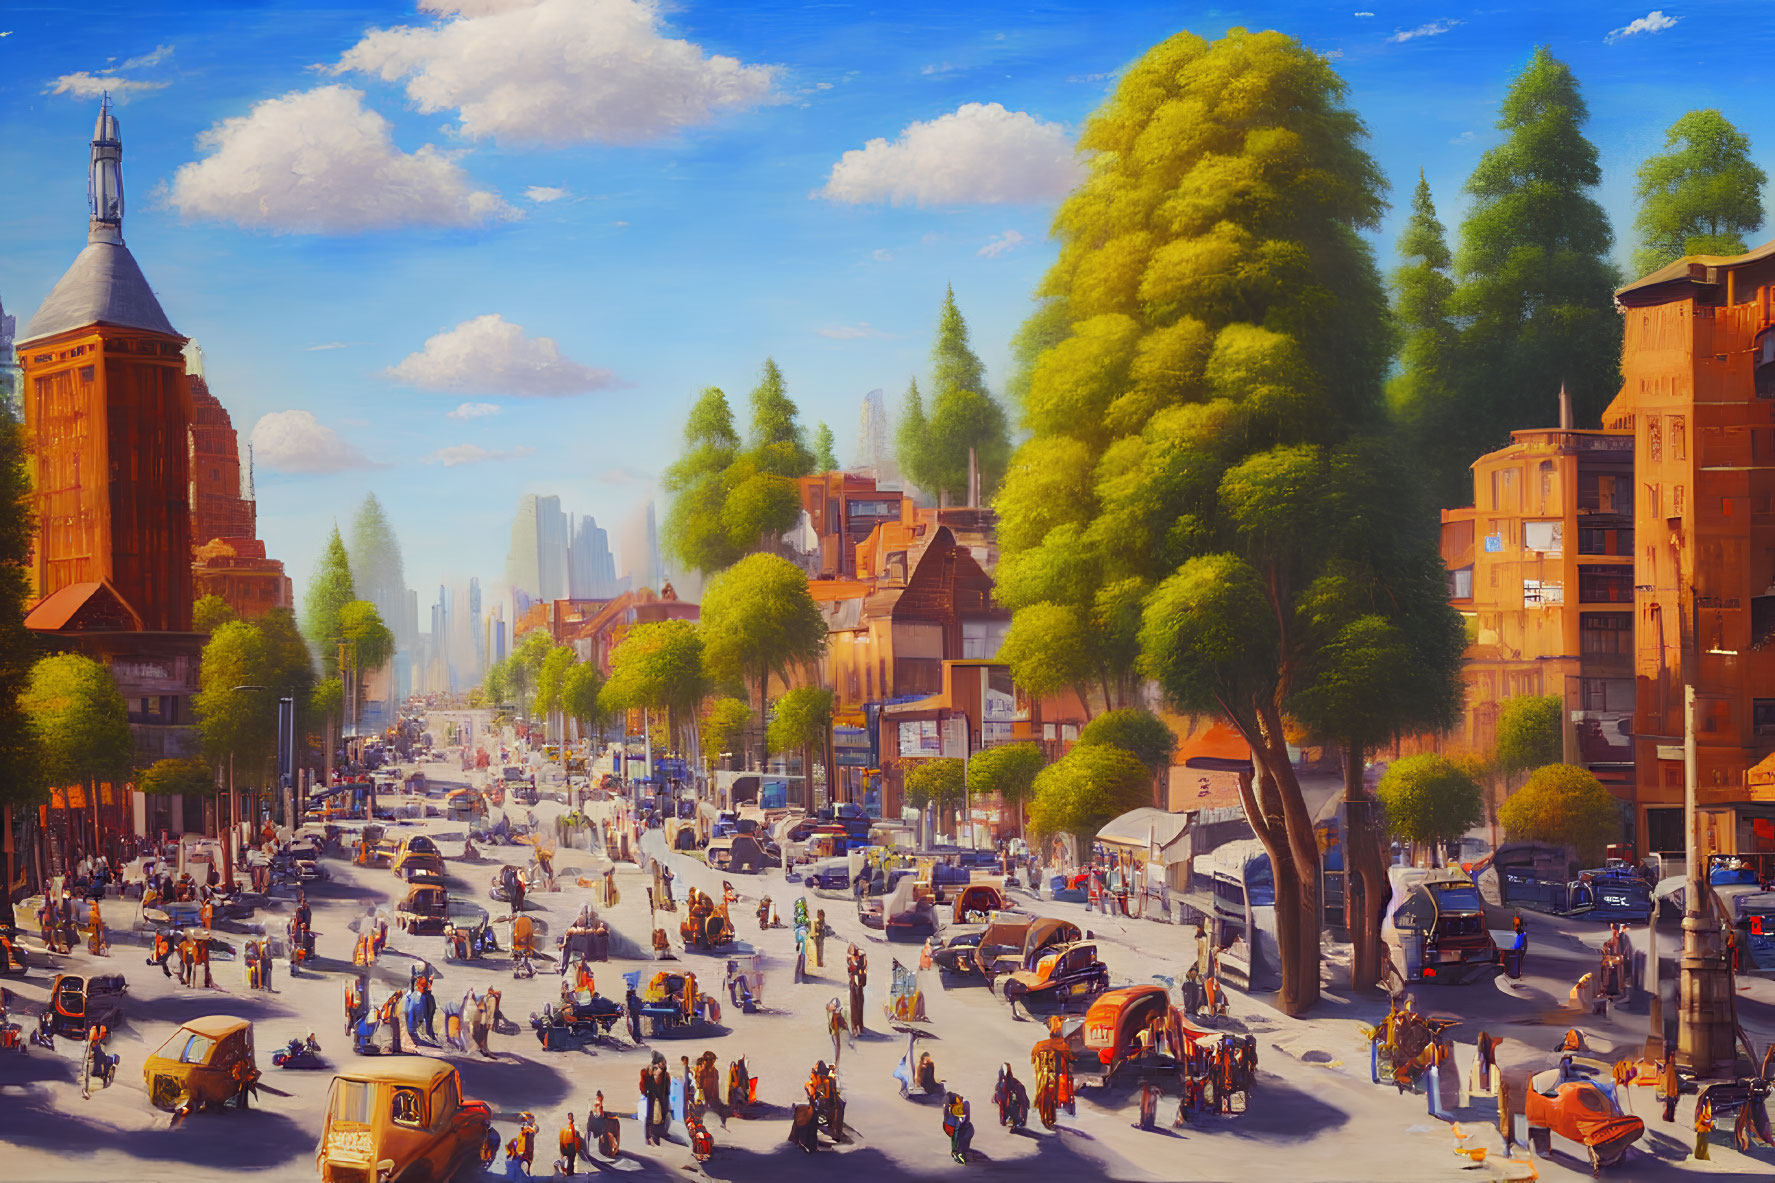 Busy city street scene with cars, pedestrians, trees, and buildings under blue sky